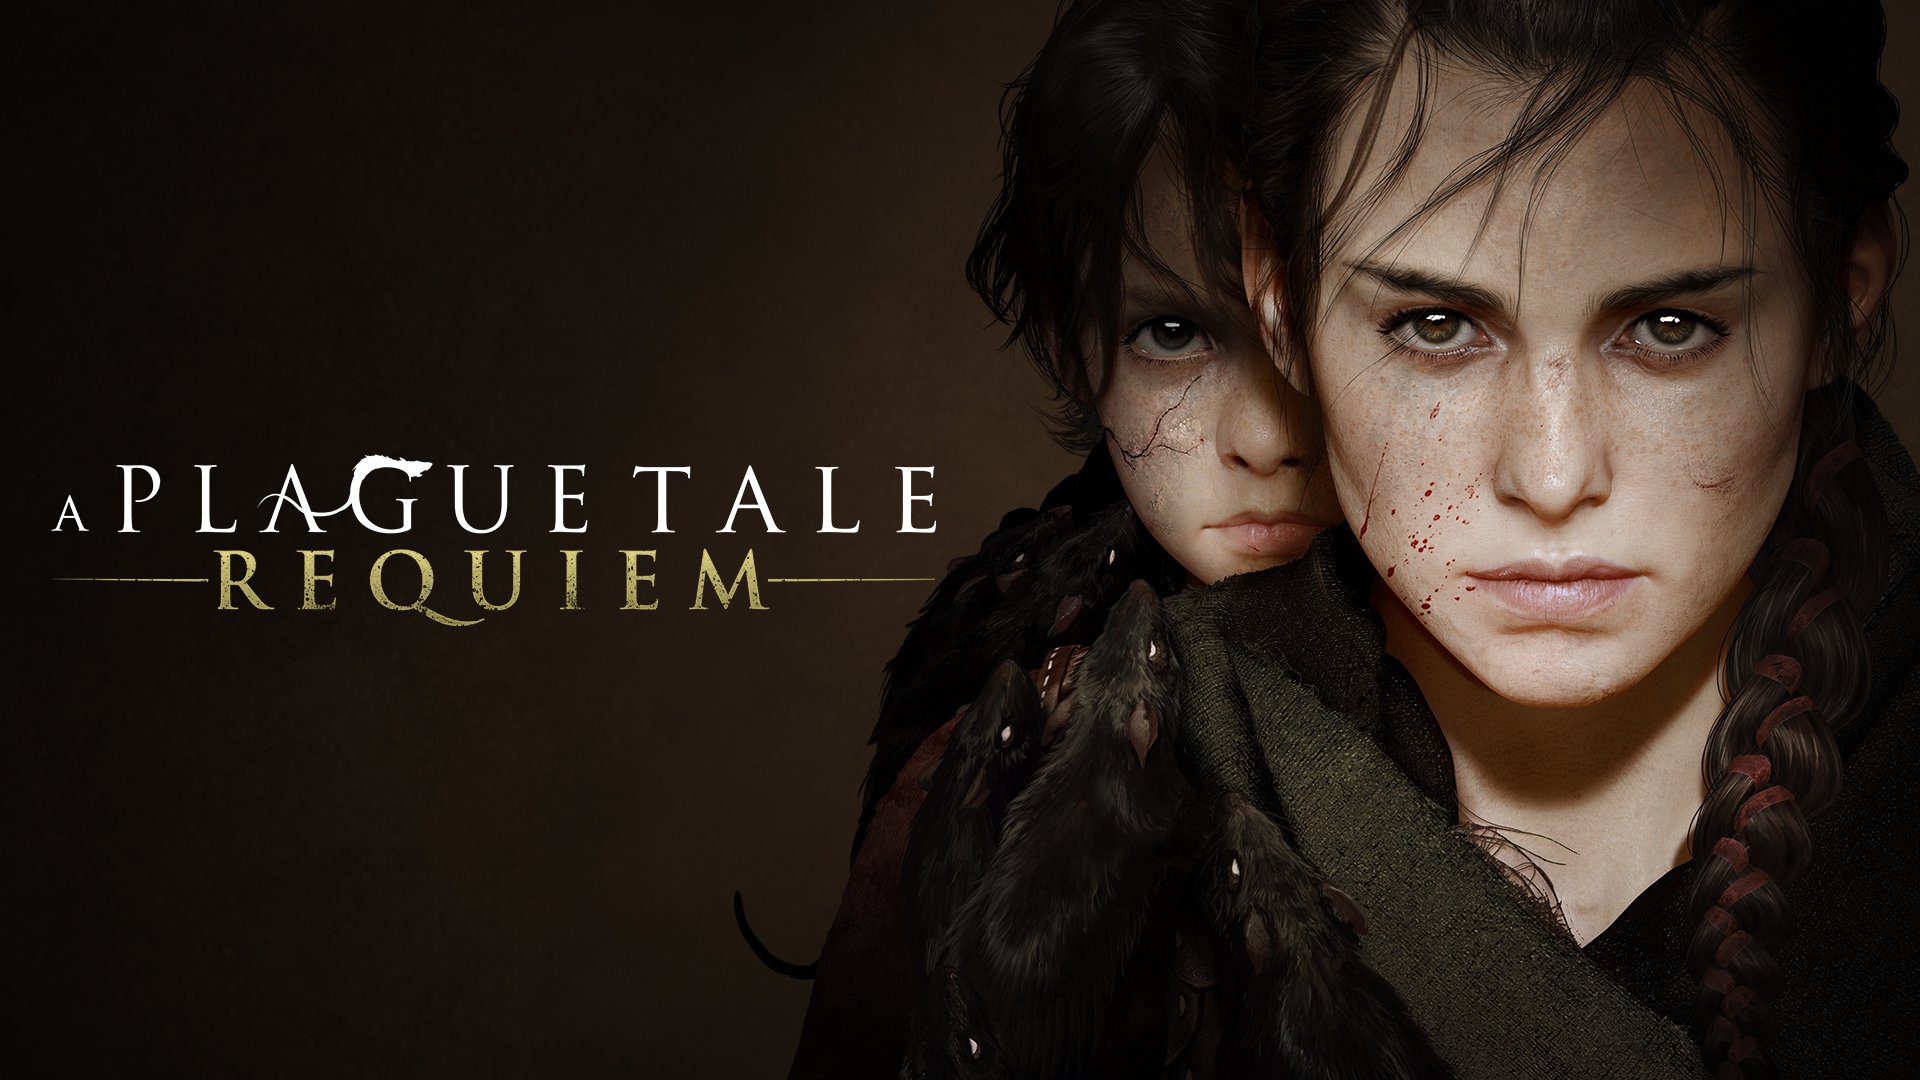 For this reason A Plague Tale Requiem is not released on Xbox One or PS4